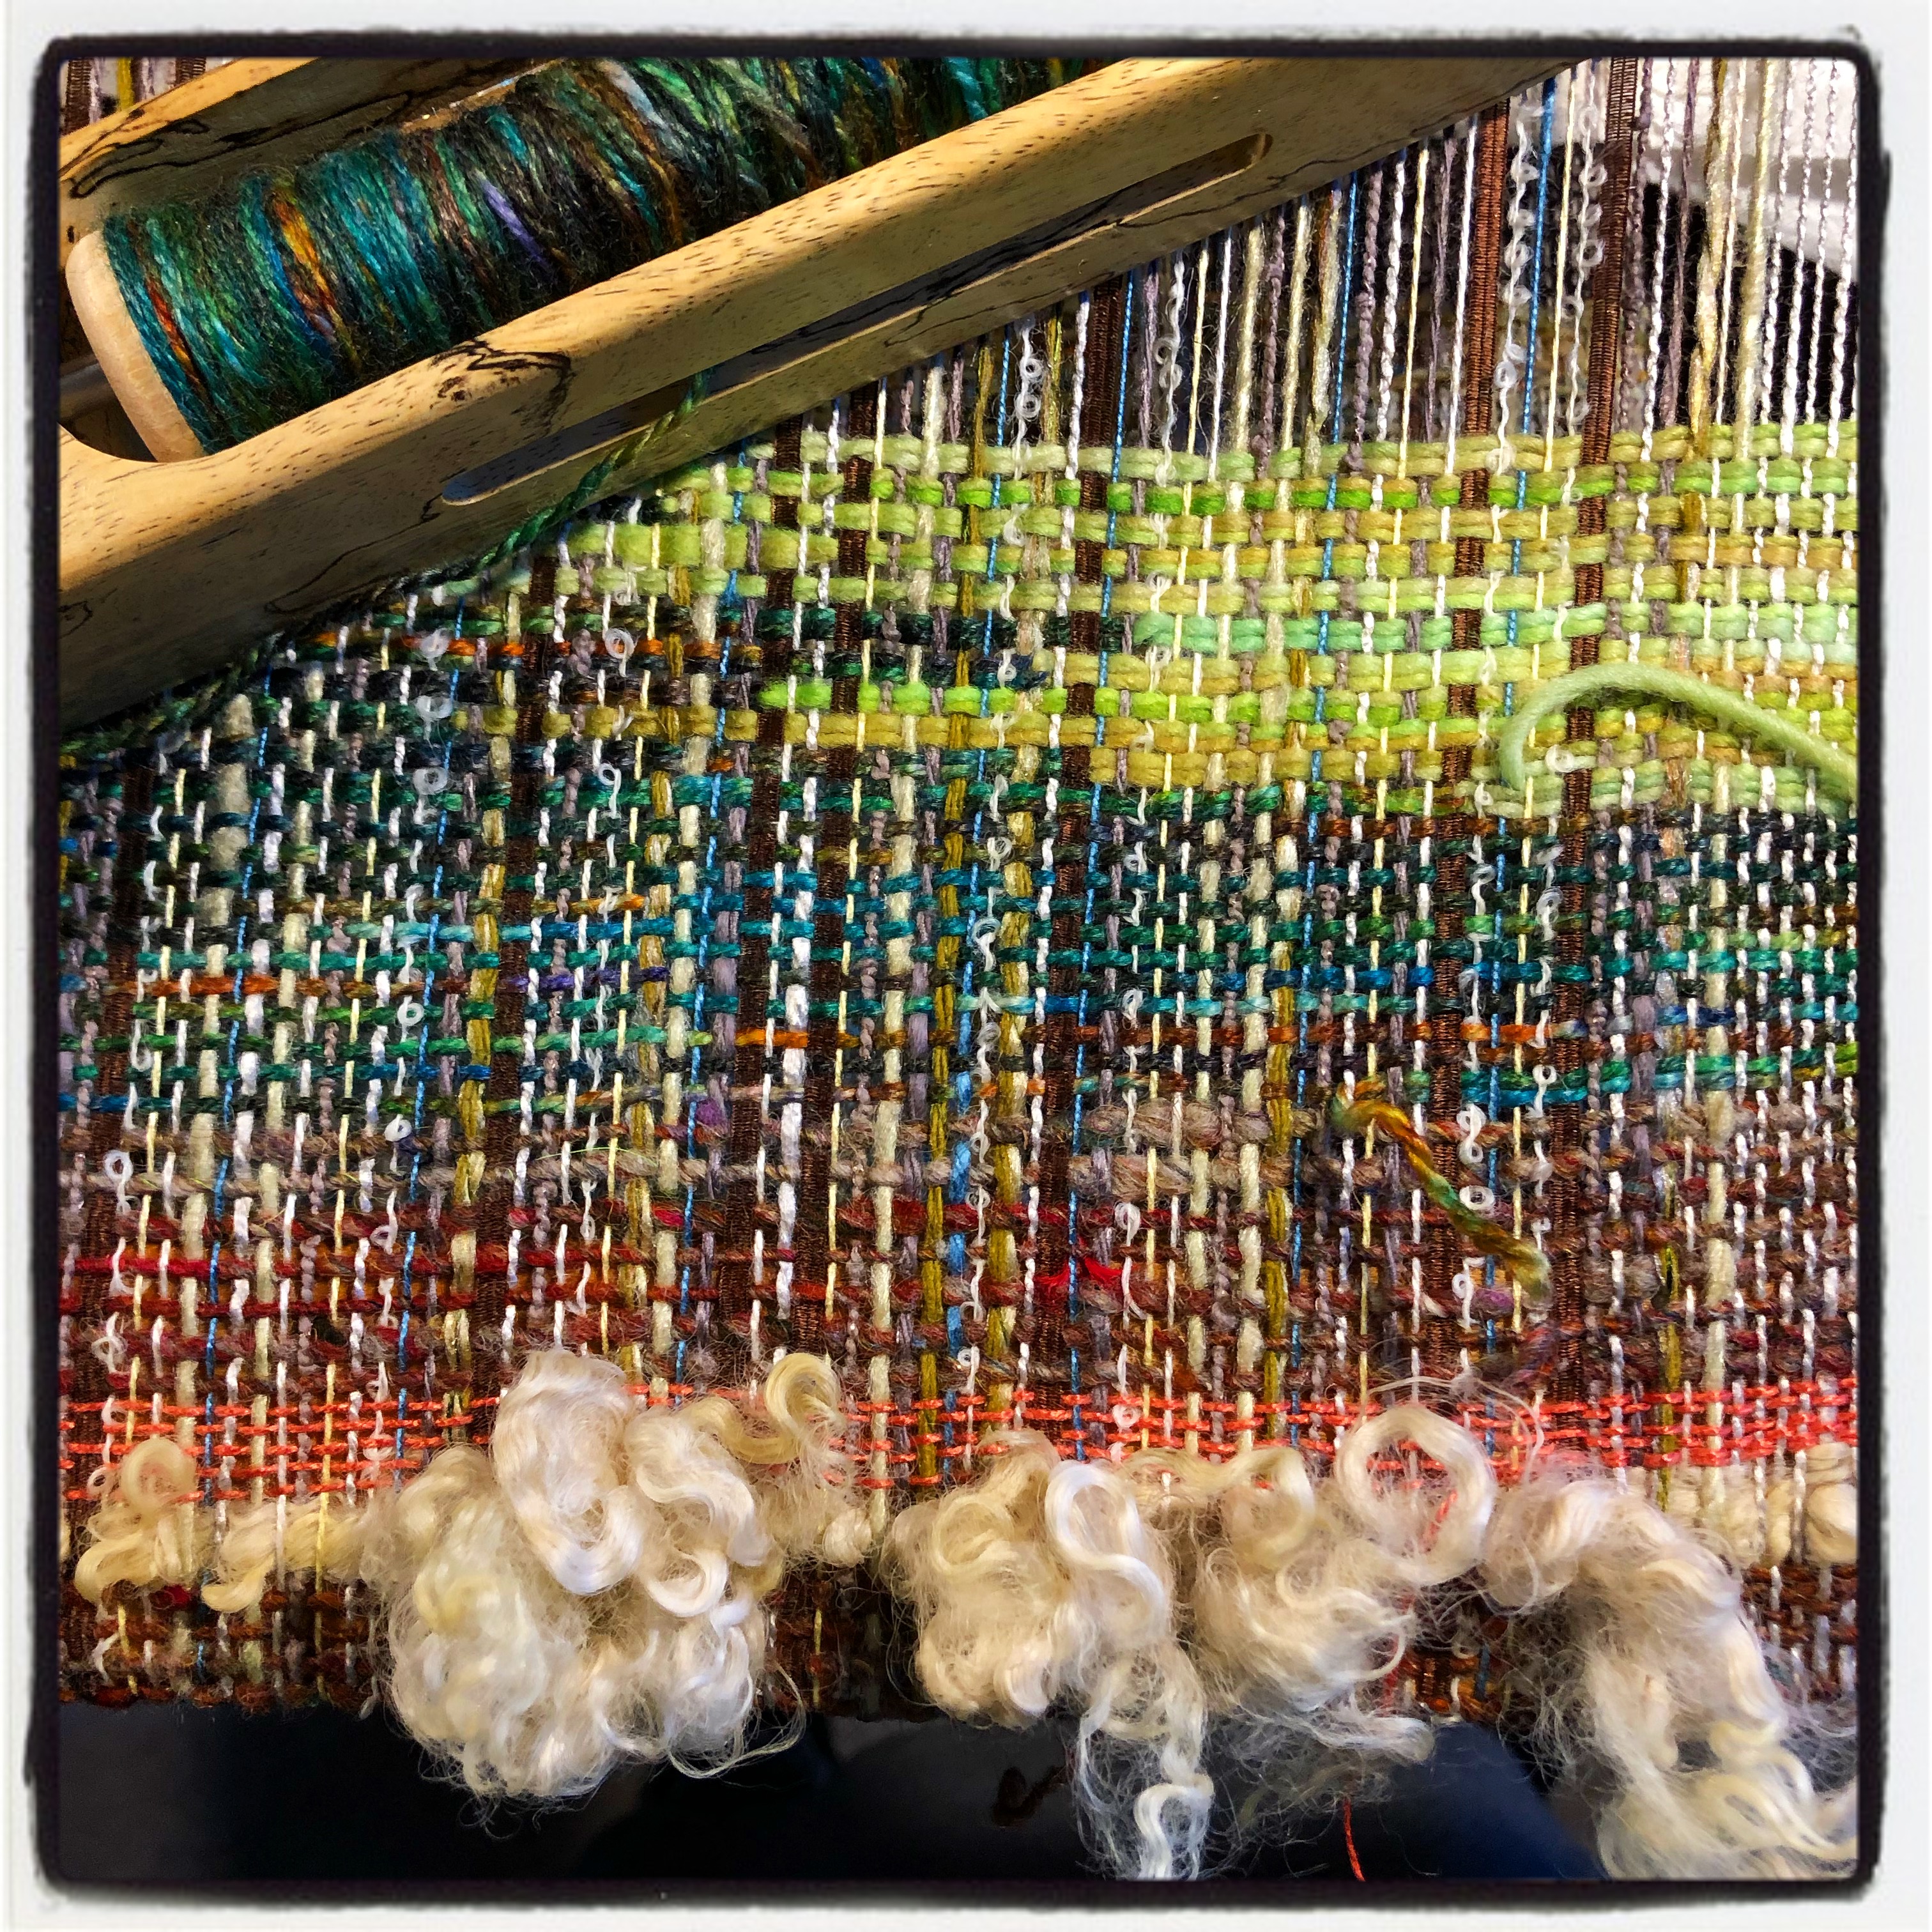 Beyond Potholders: using the potholder loom for weaving with yarn